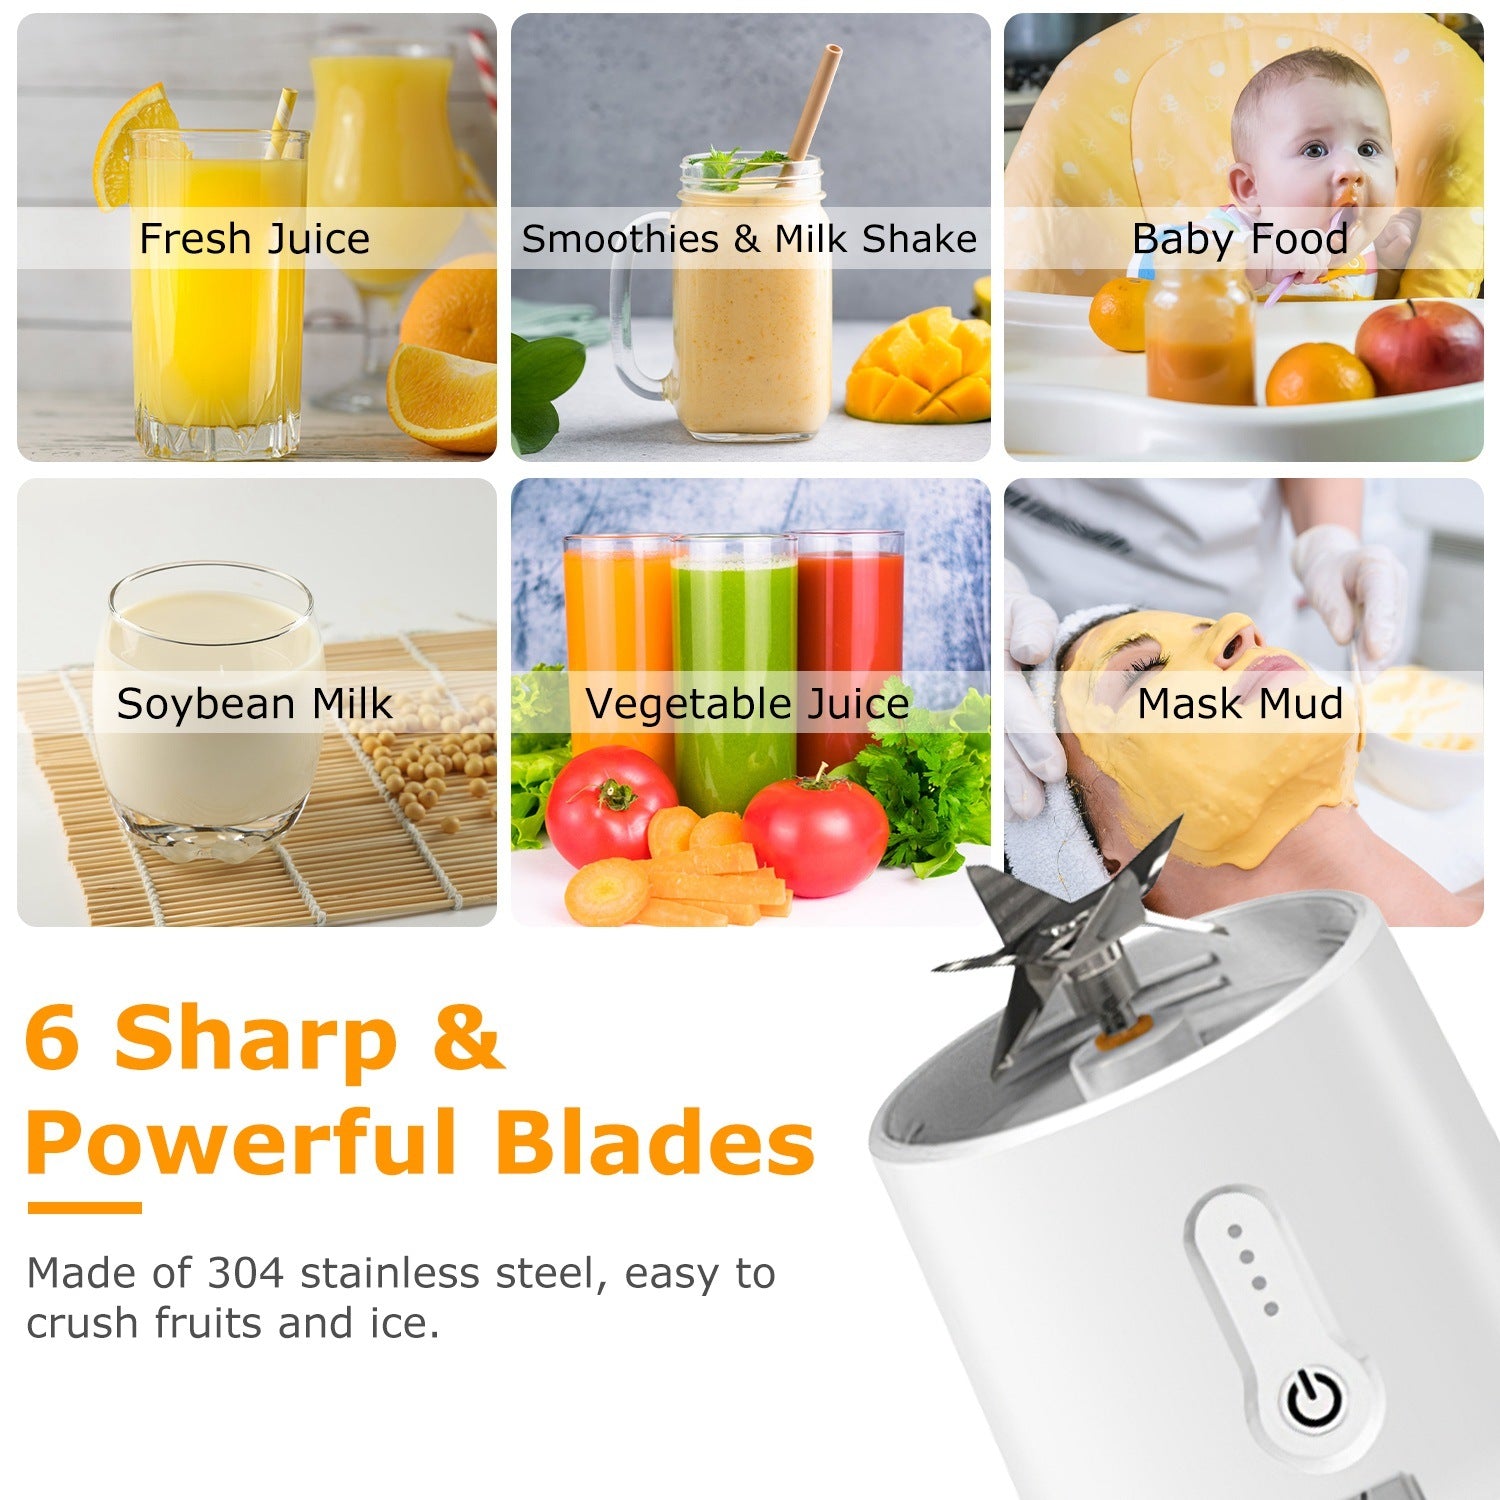 A 15.2OZ portable fruit blender with 6 blades filled with fruits and berries, featuring a capacity.